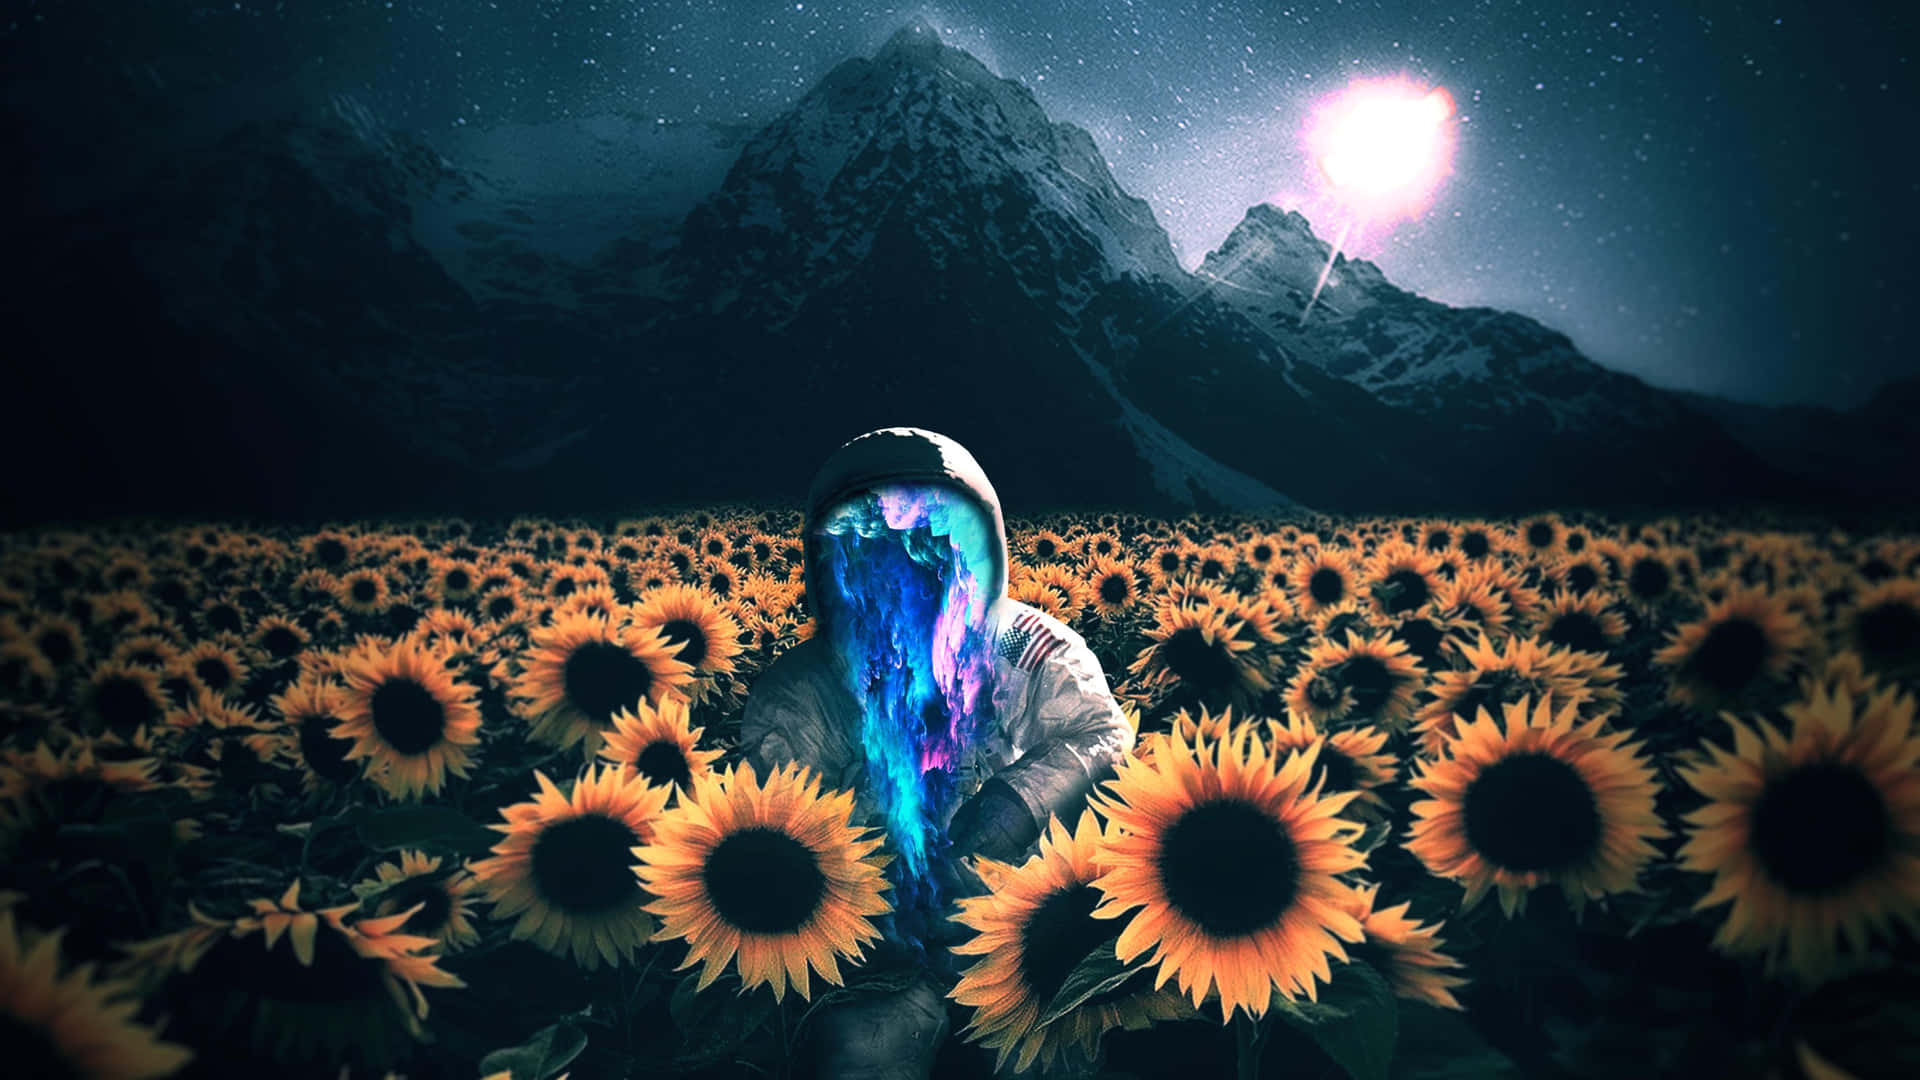 a person in a field of sunflowers with a blue light